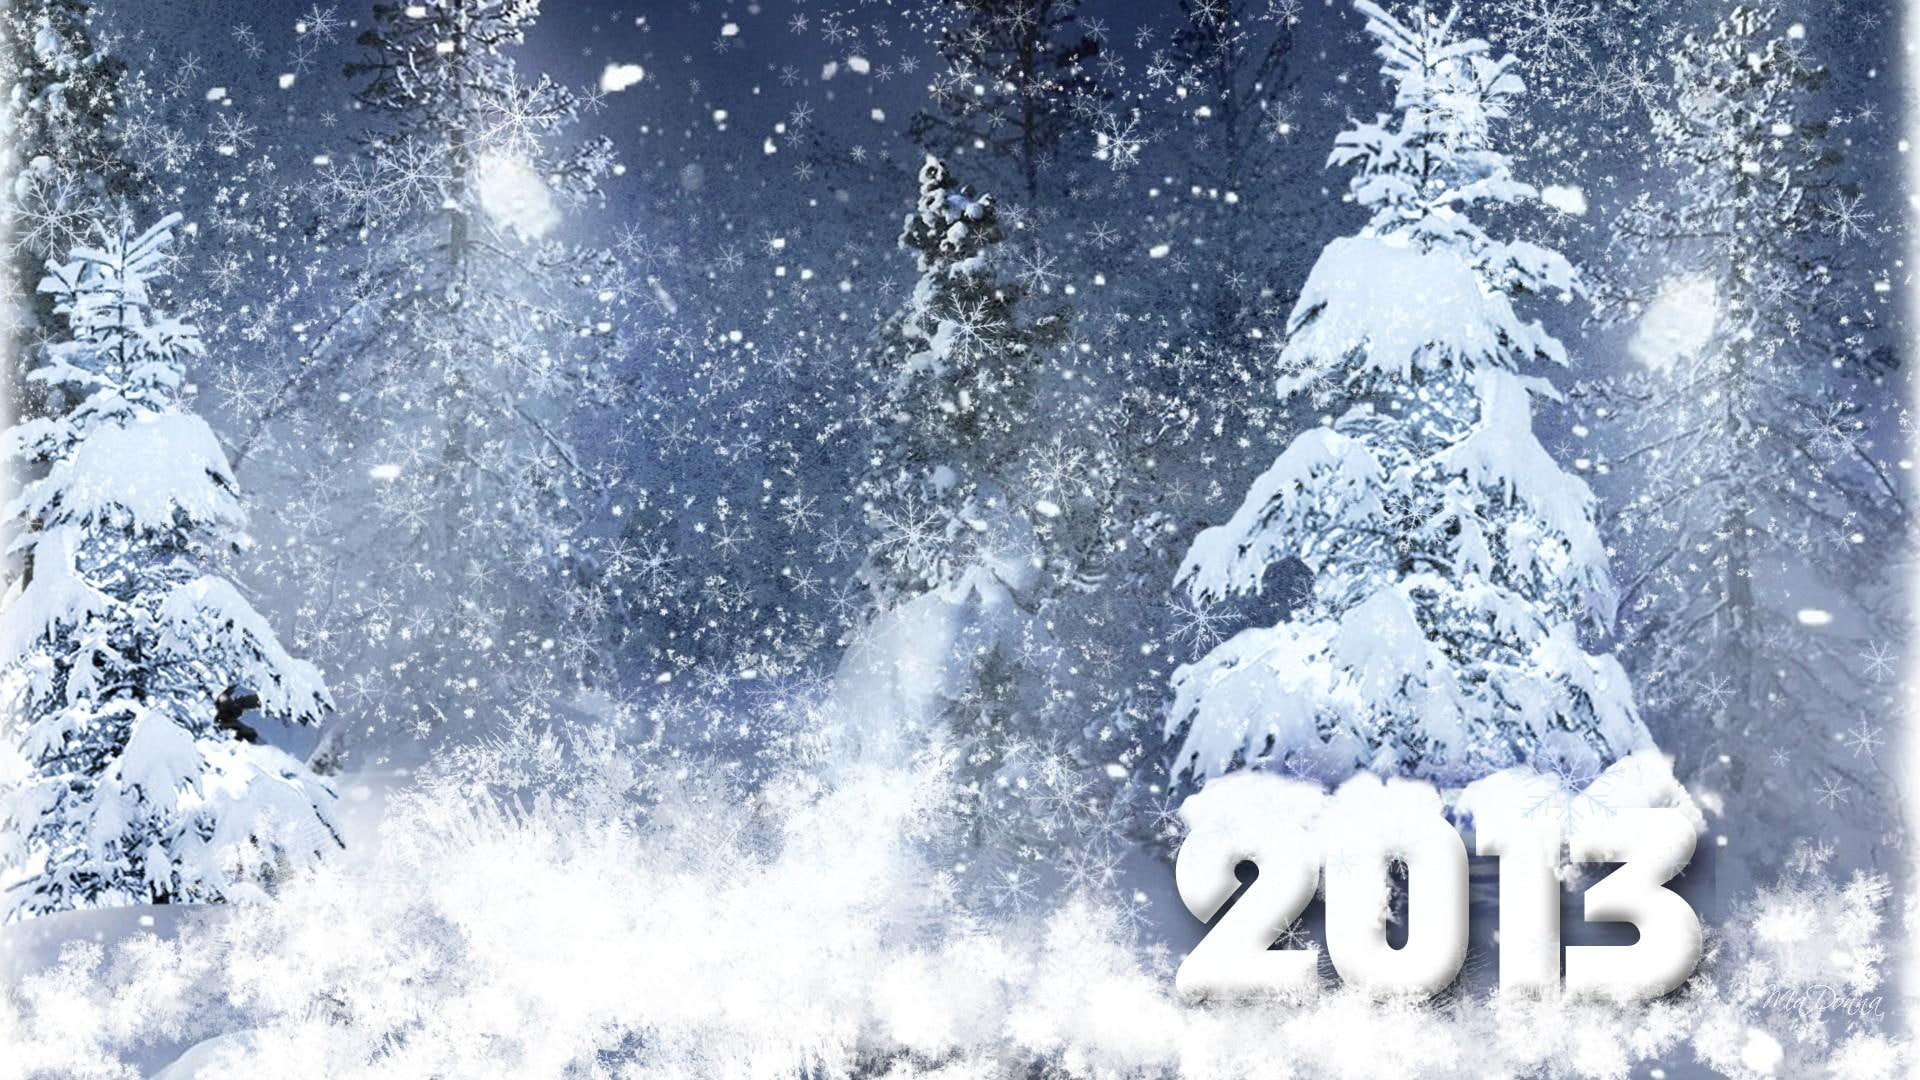 Winter 2013, new year, snowflakes, wonderland, cold, forest, trees